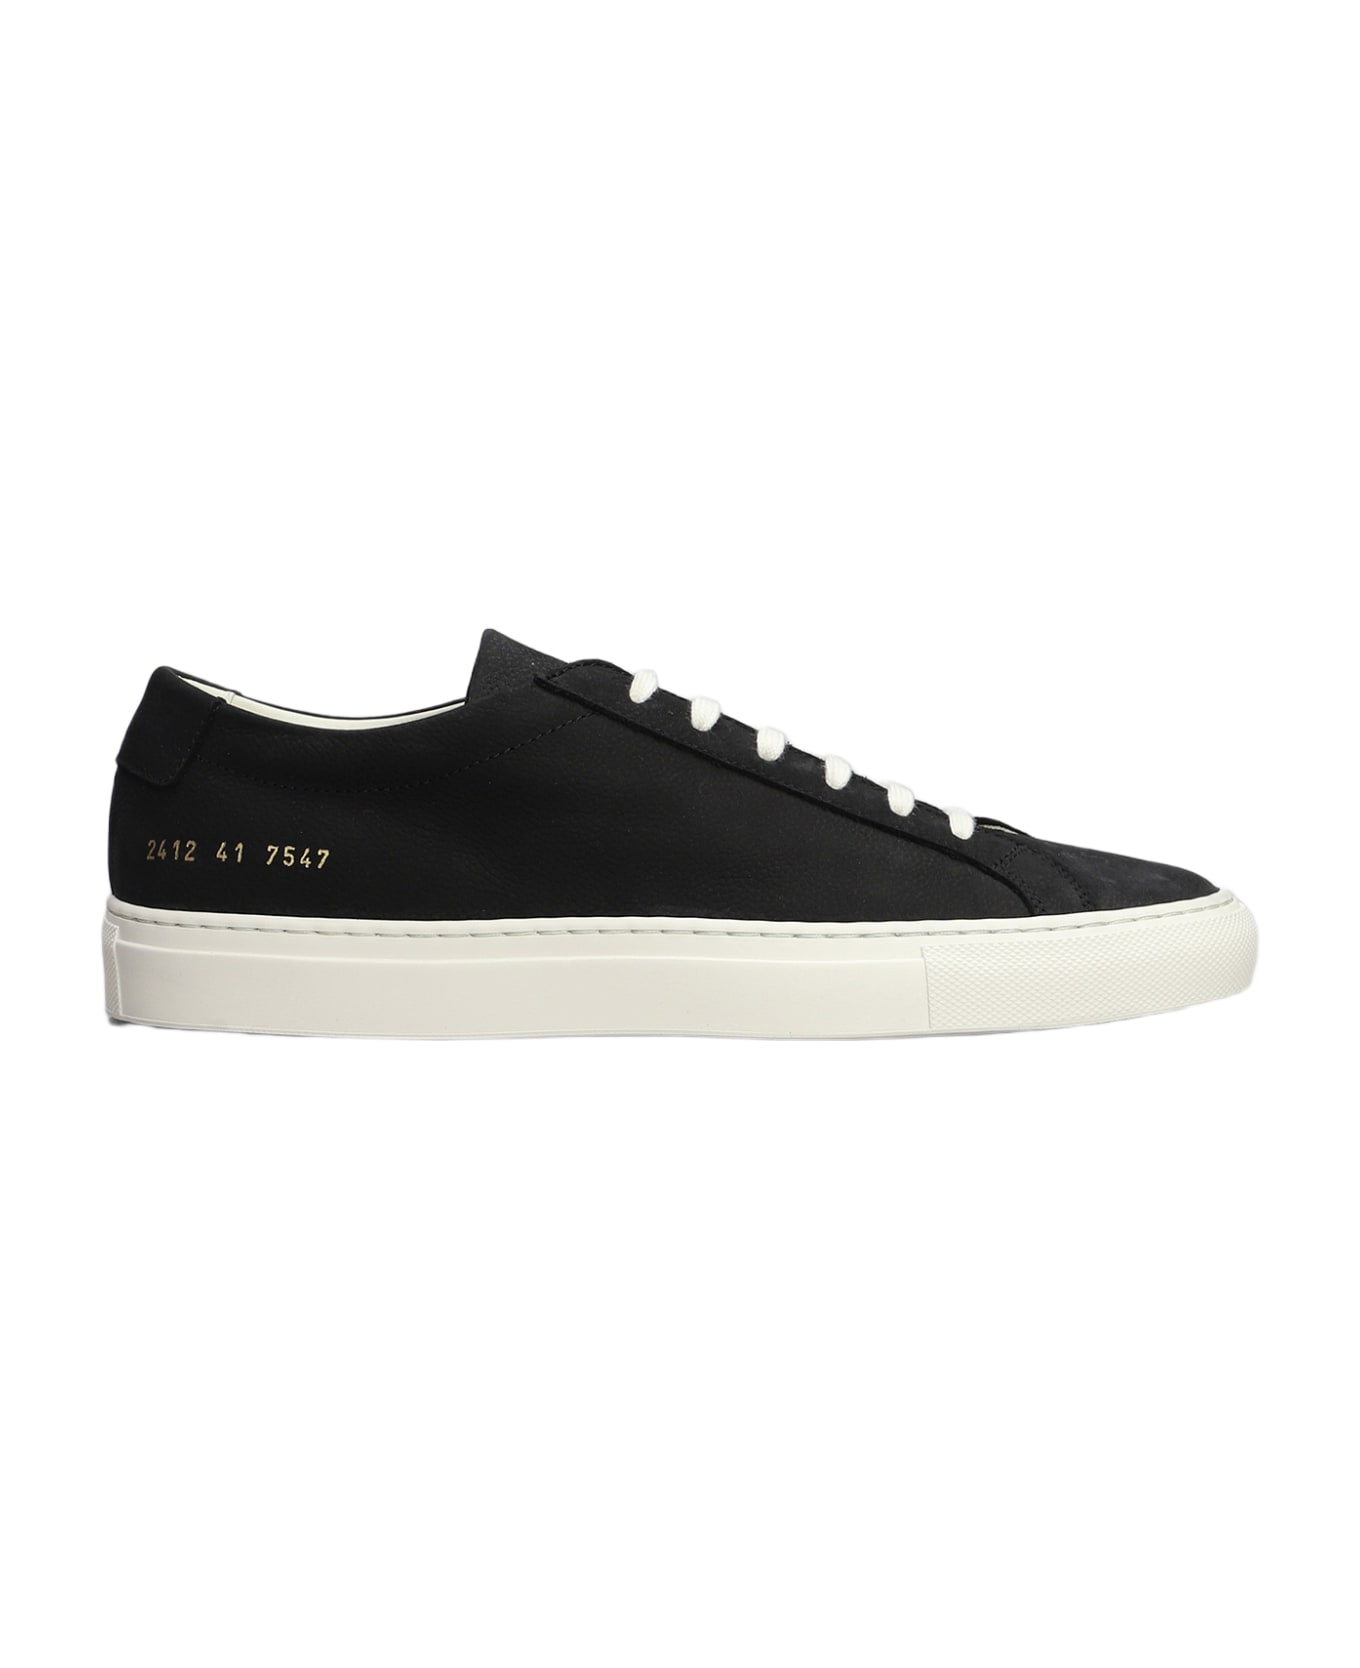 Common Projects Contrast Achilles Sneakers In Black Suede - black